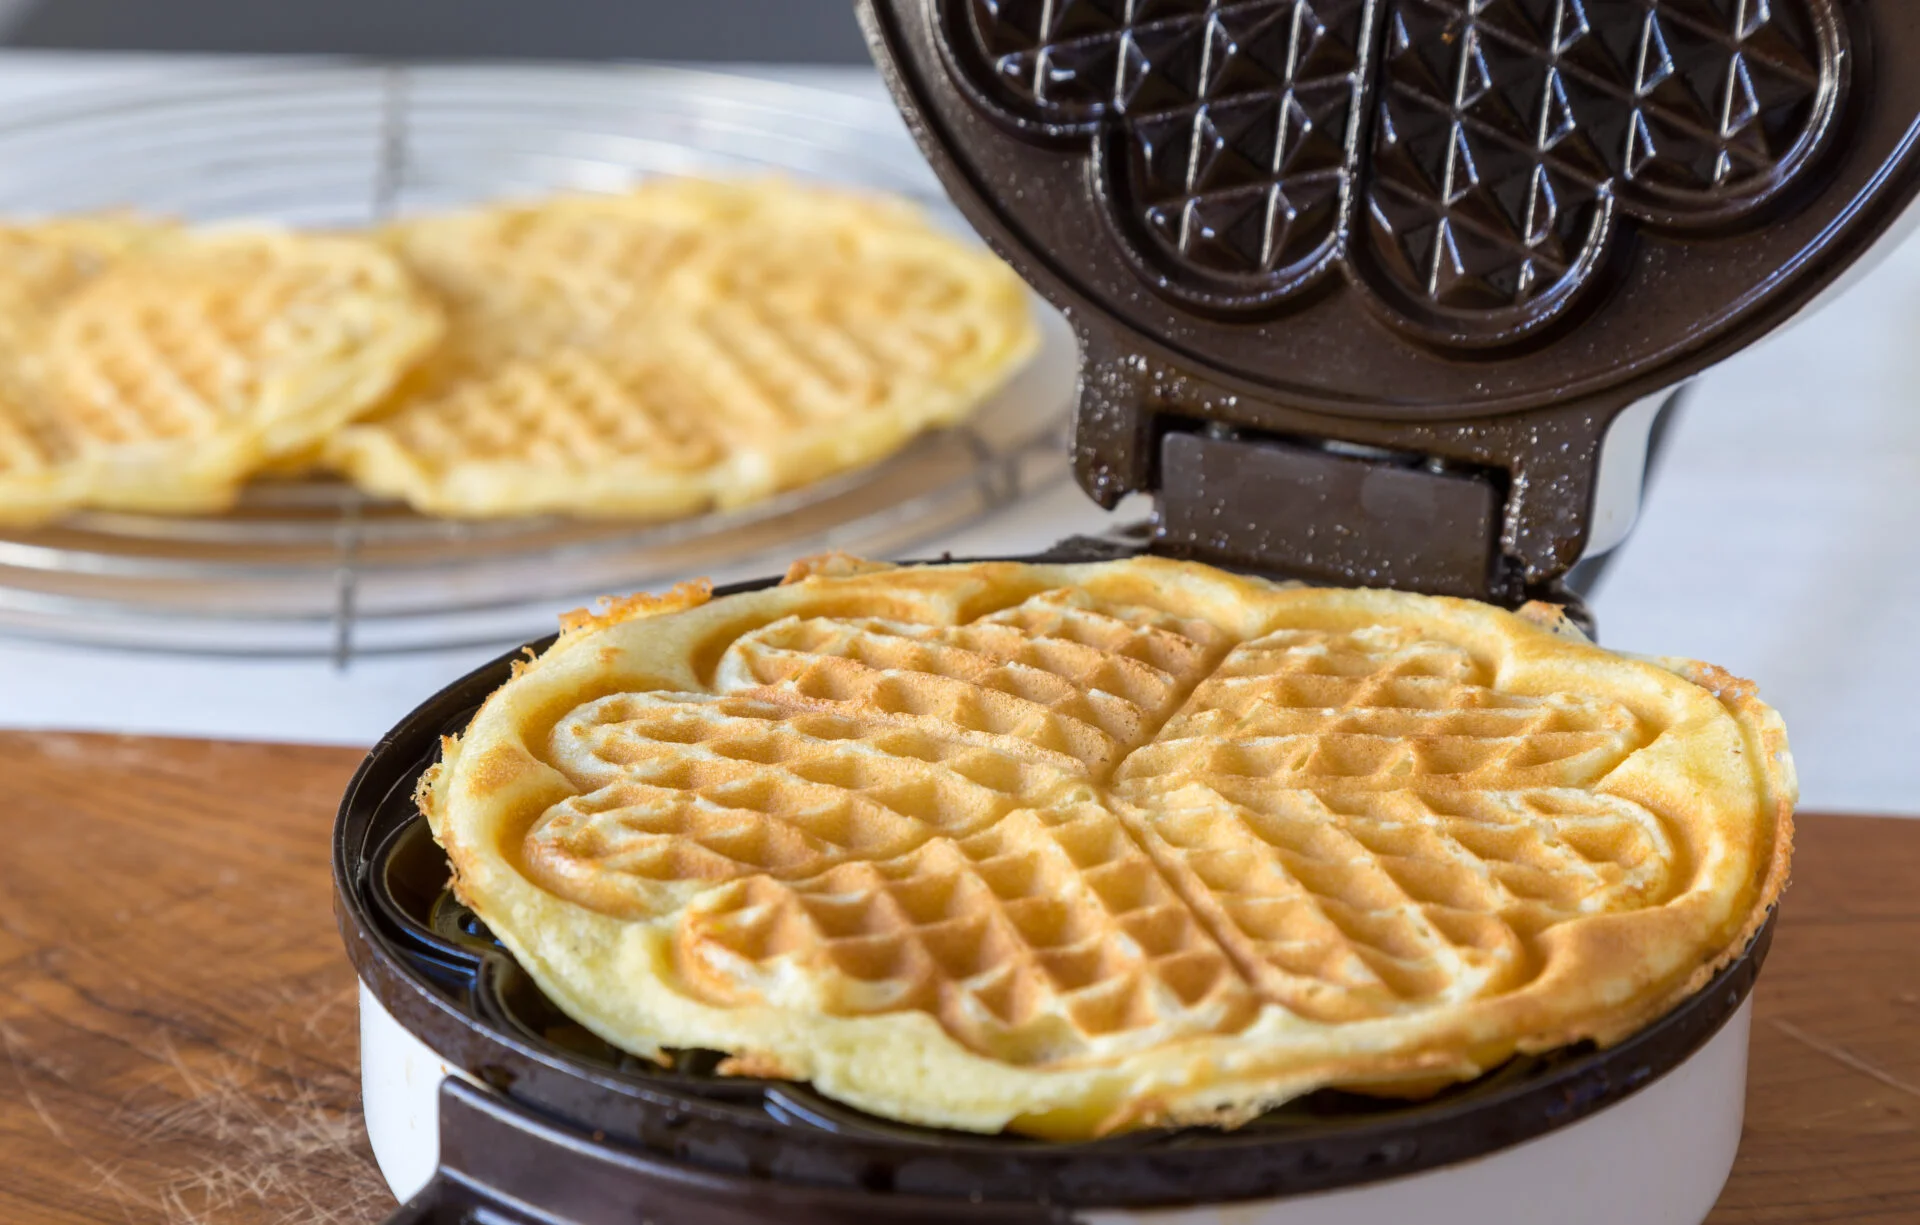 Homemade waffles are cooked in a non-toxic waffle iron